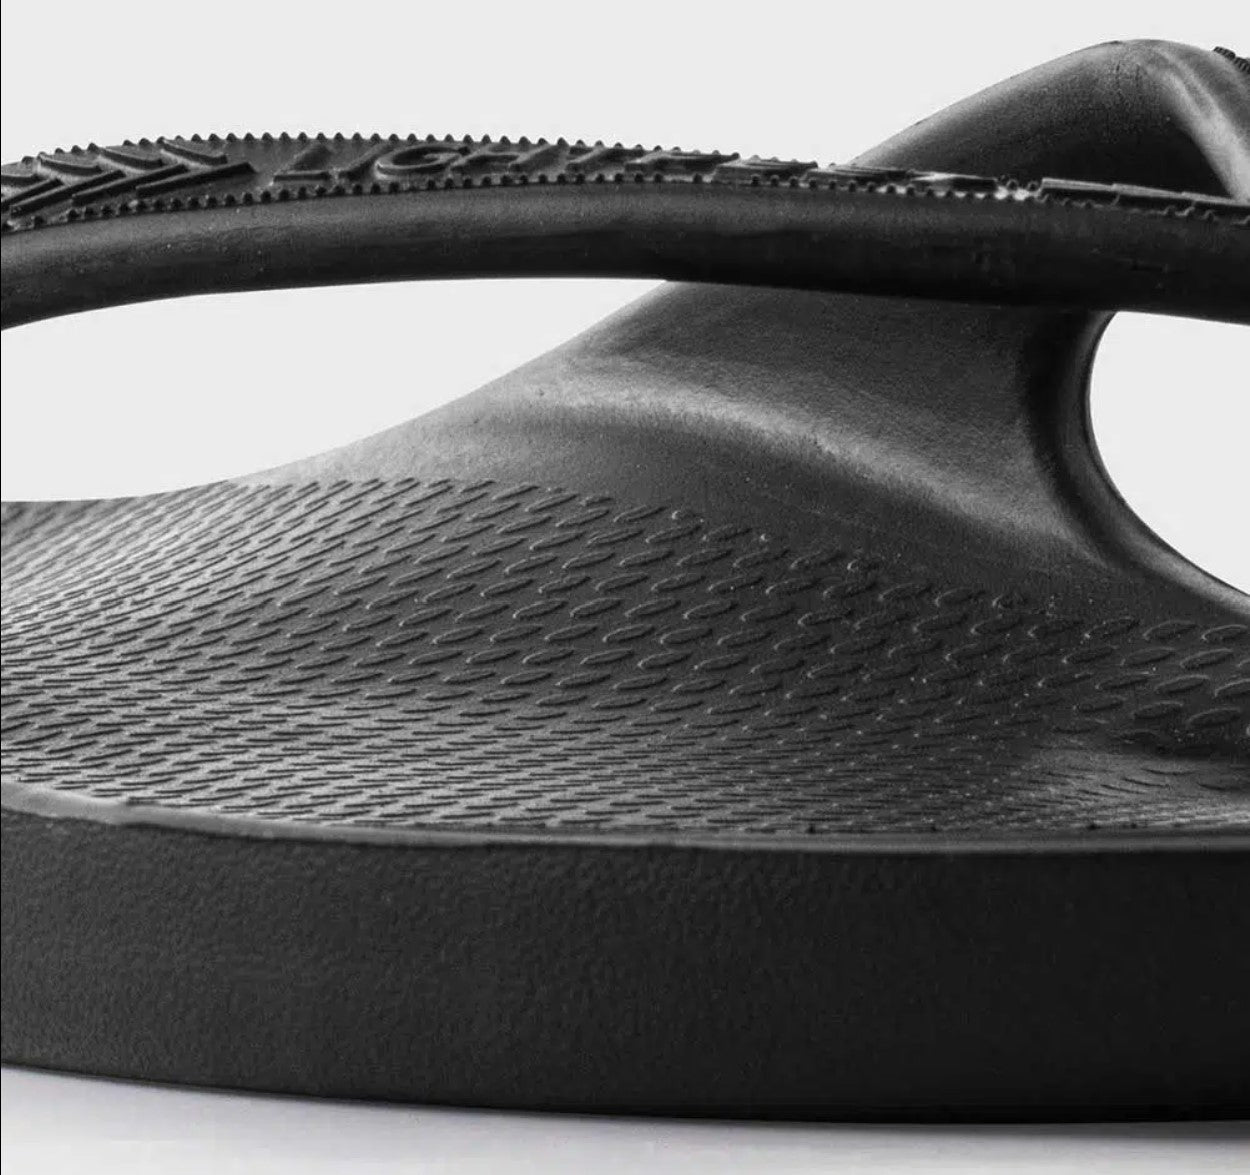 Lightfeet ReVIVE Arch Support Thong